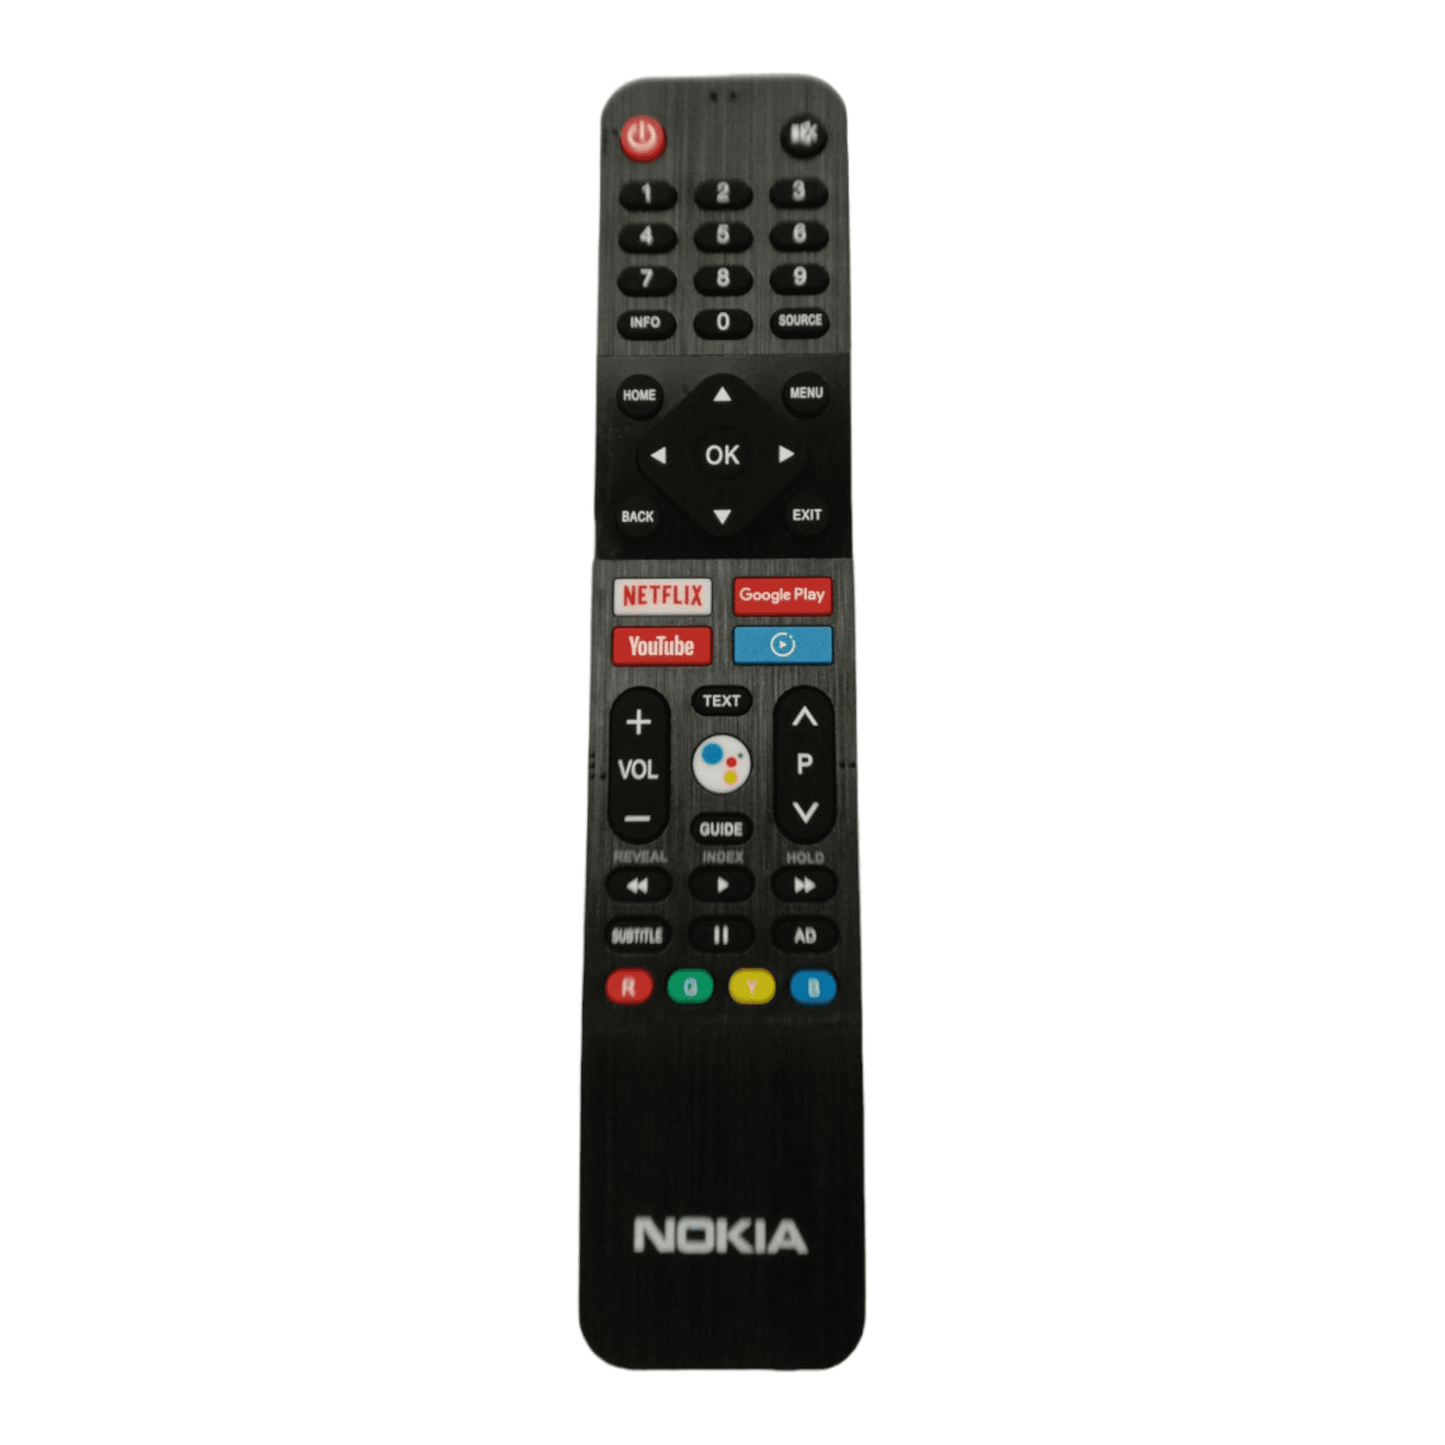 Nokia  Smart led tv remote with Google voice recognition and YouTube and Netflix and Amazon prime video